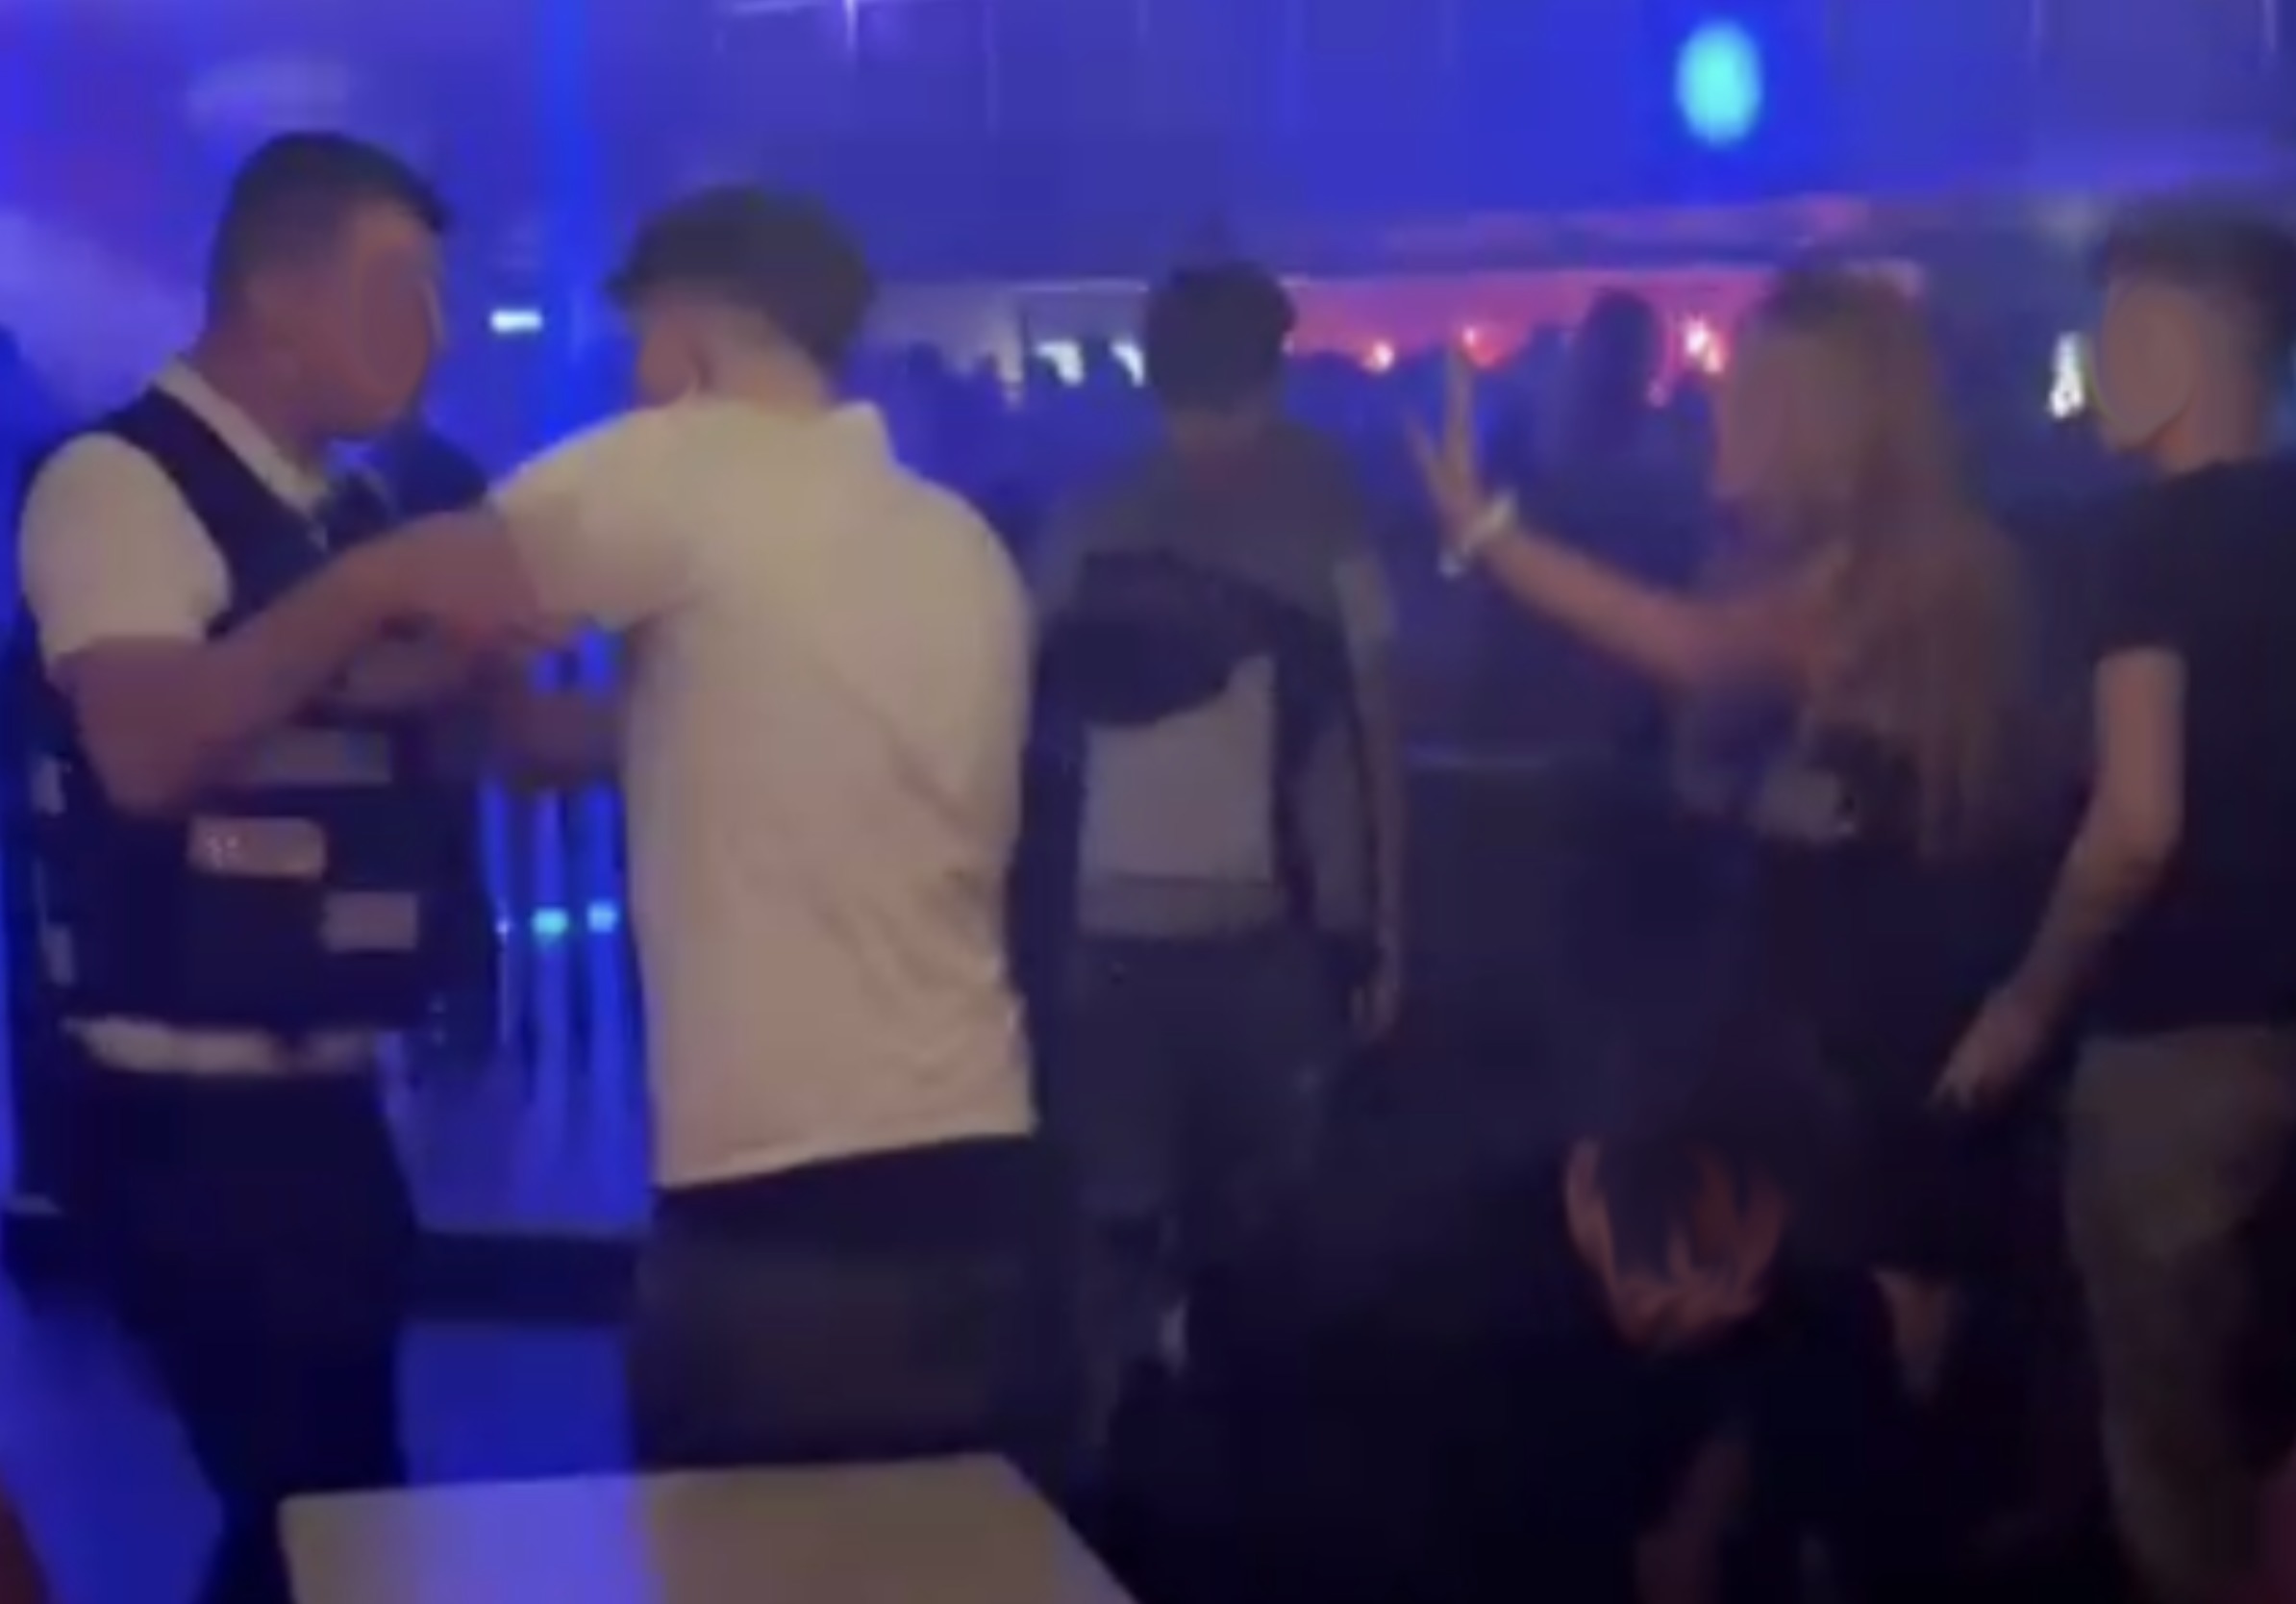 Screengrabs of footage in the club, as security interfered